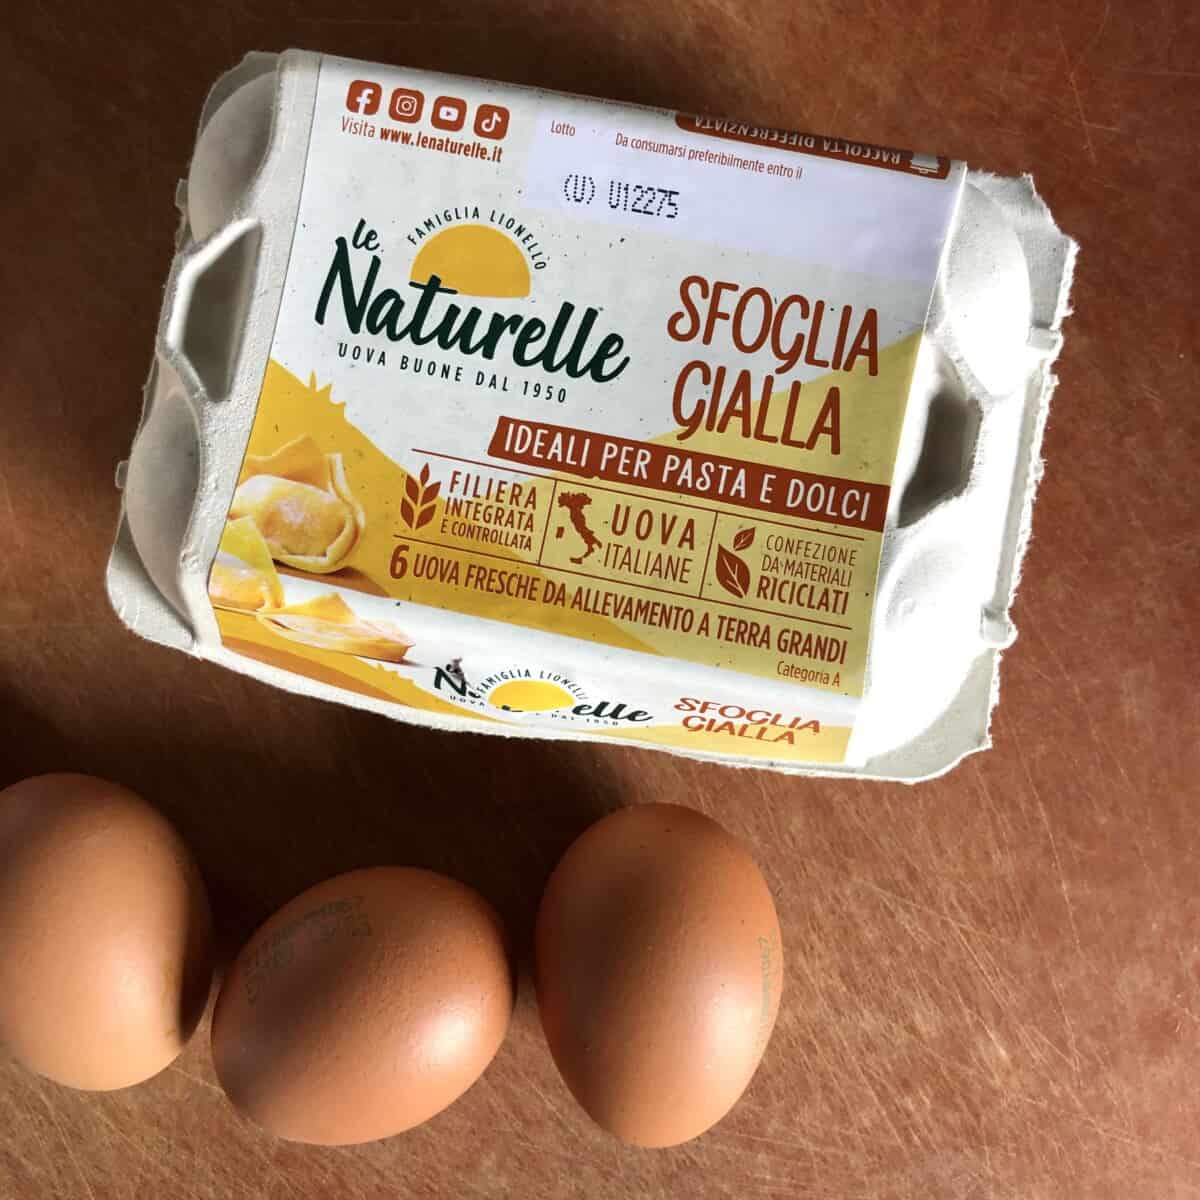 a 6-count carton of Italian pasta gialla eggs showing tortellini on the package and other pasta